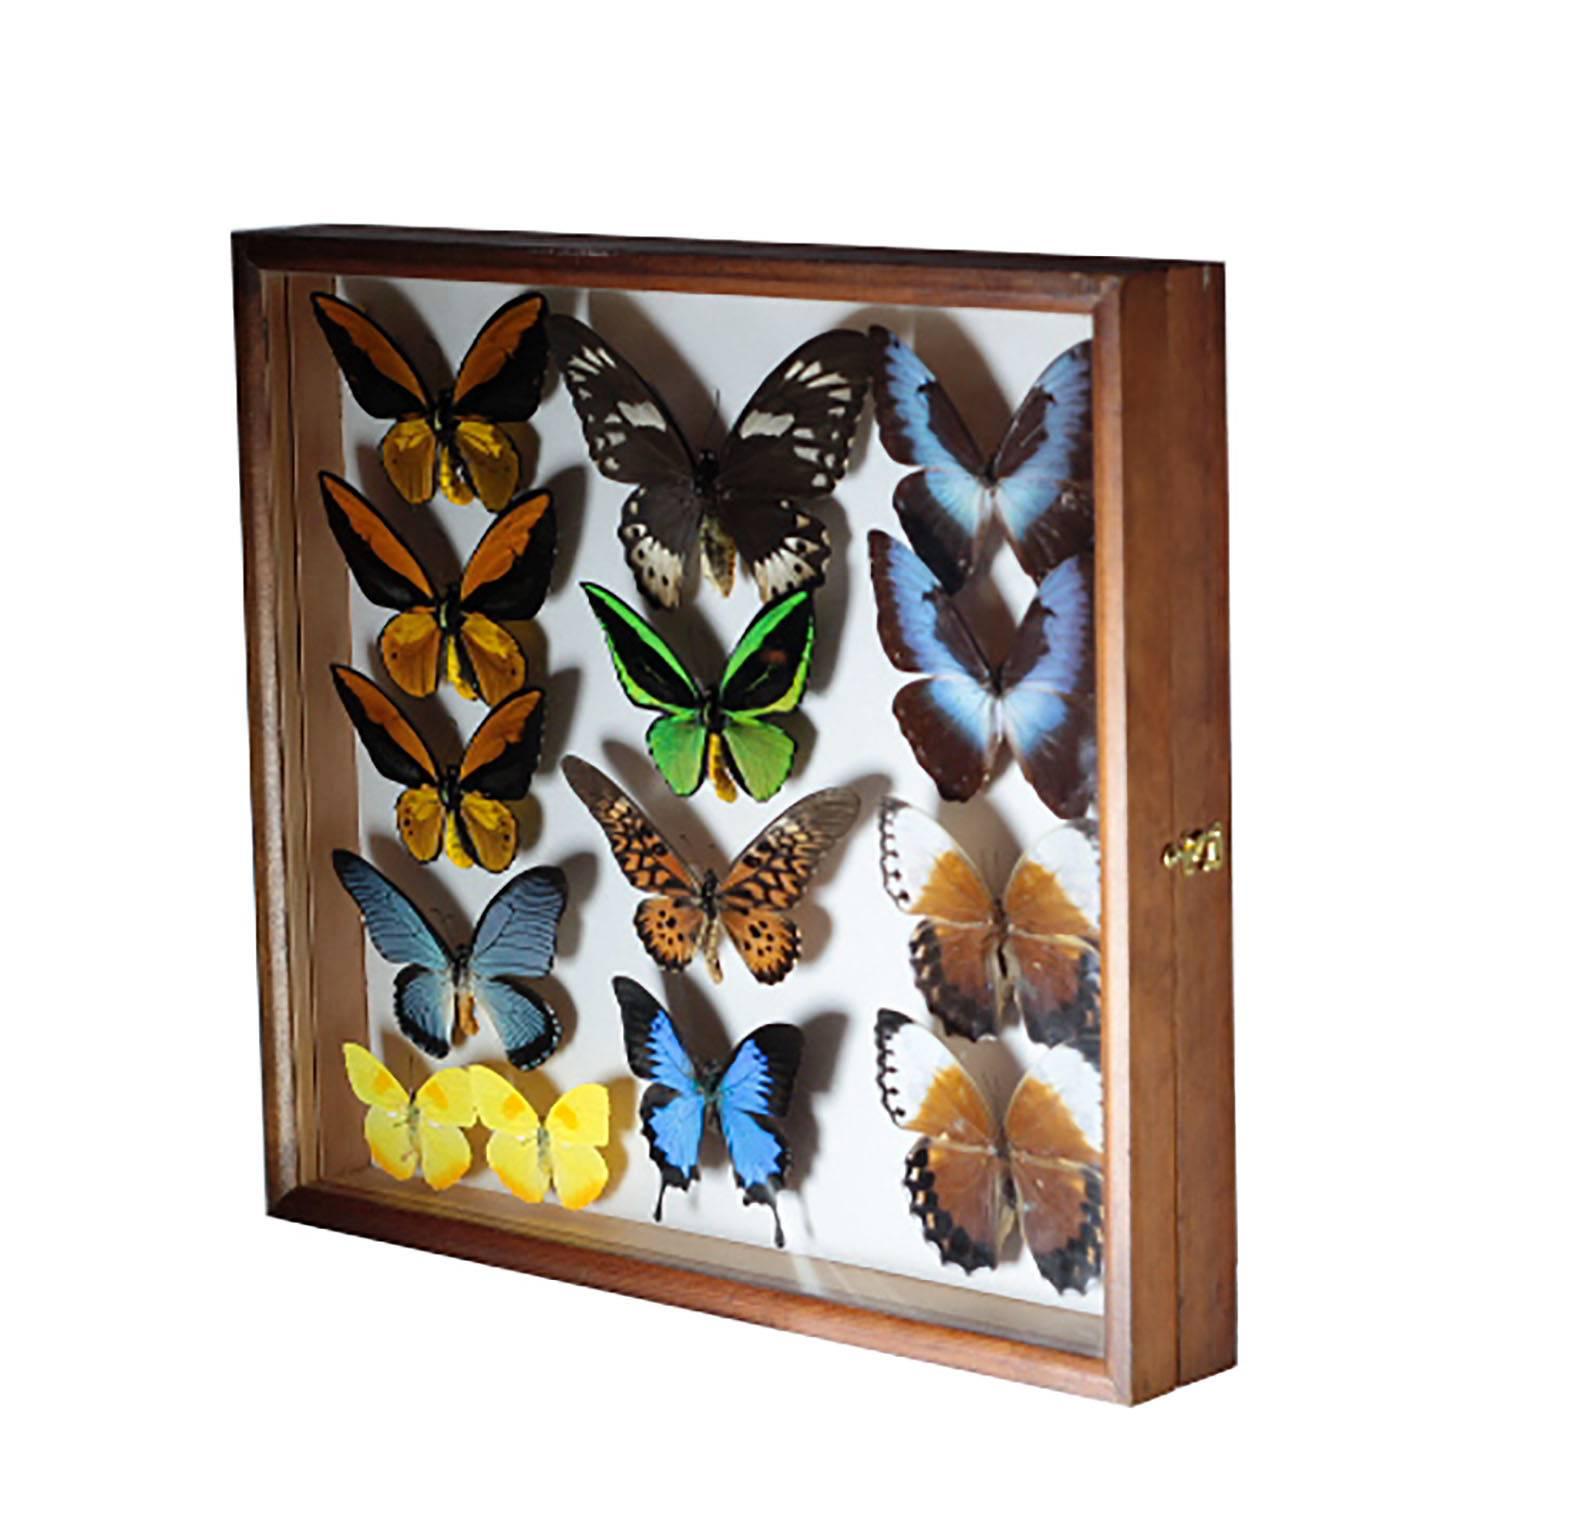 Collection of vibrant birdwing butterfies in latched glass and wooden collector's case. Origin of butterfles: Indonesia and New Guinea.